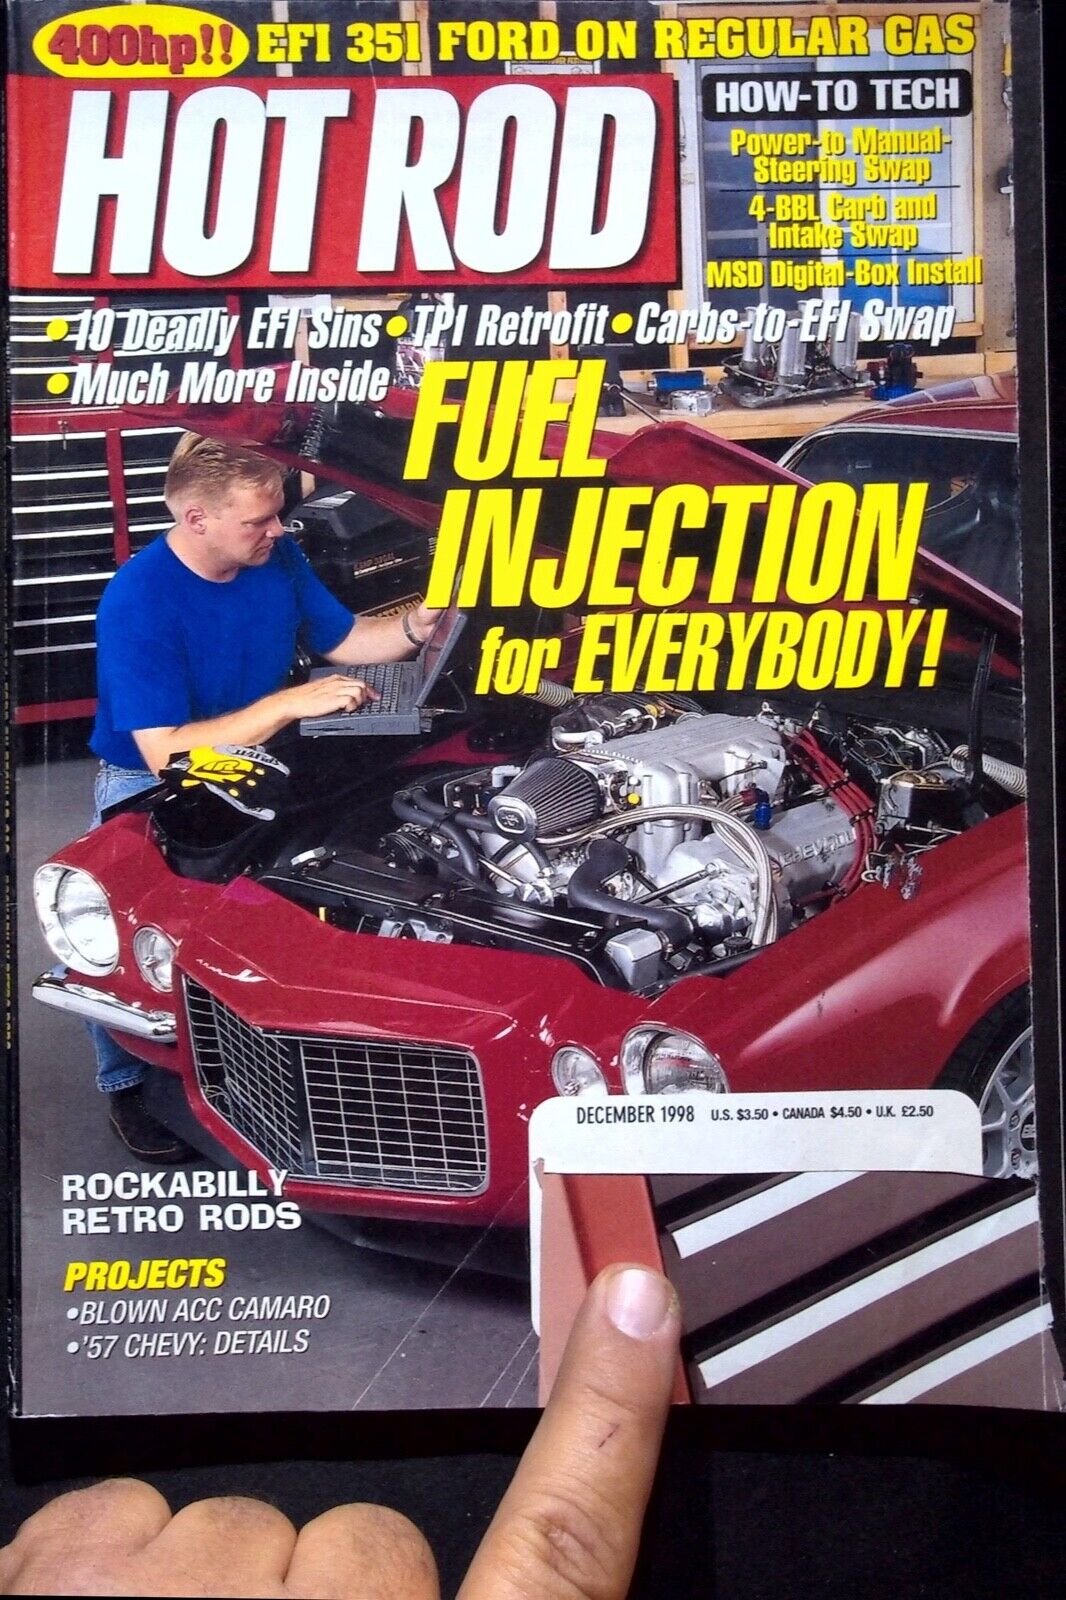 FORD FUEL INJECTION CHEVY CAMARO - HOT ROD MAGAZINE, DECEMBER 1998